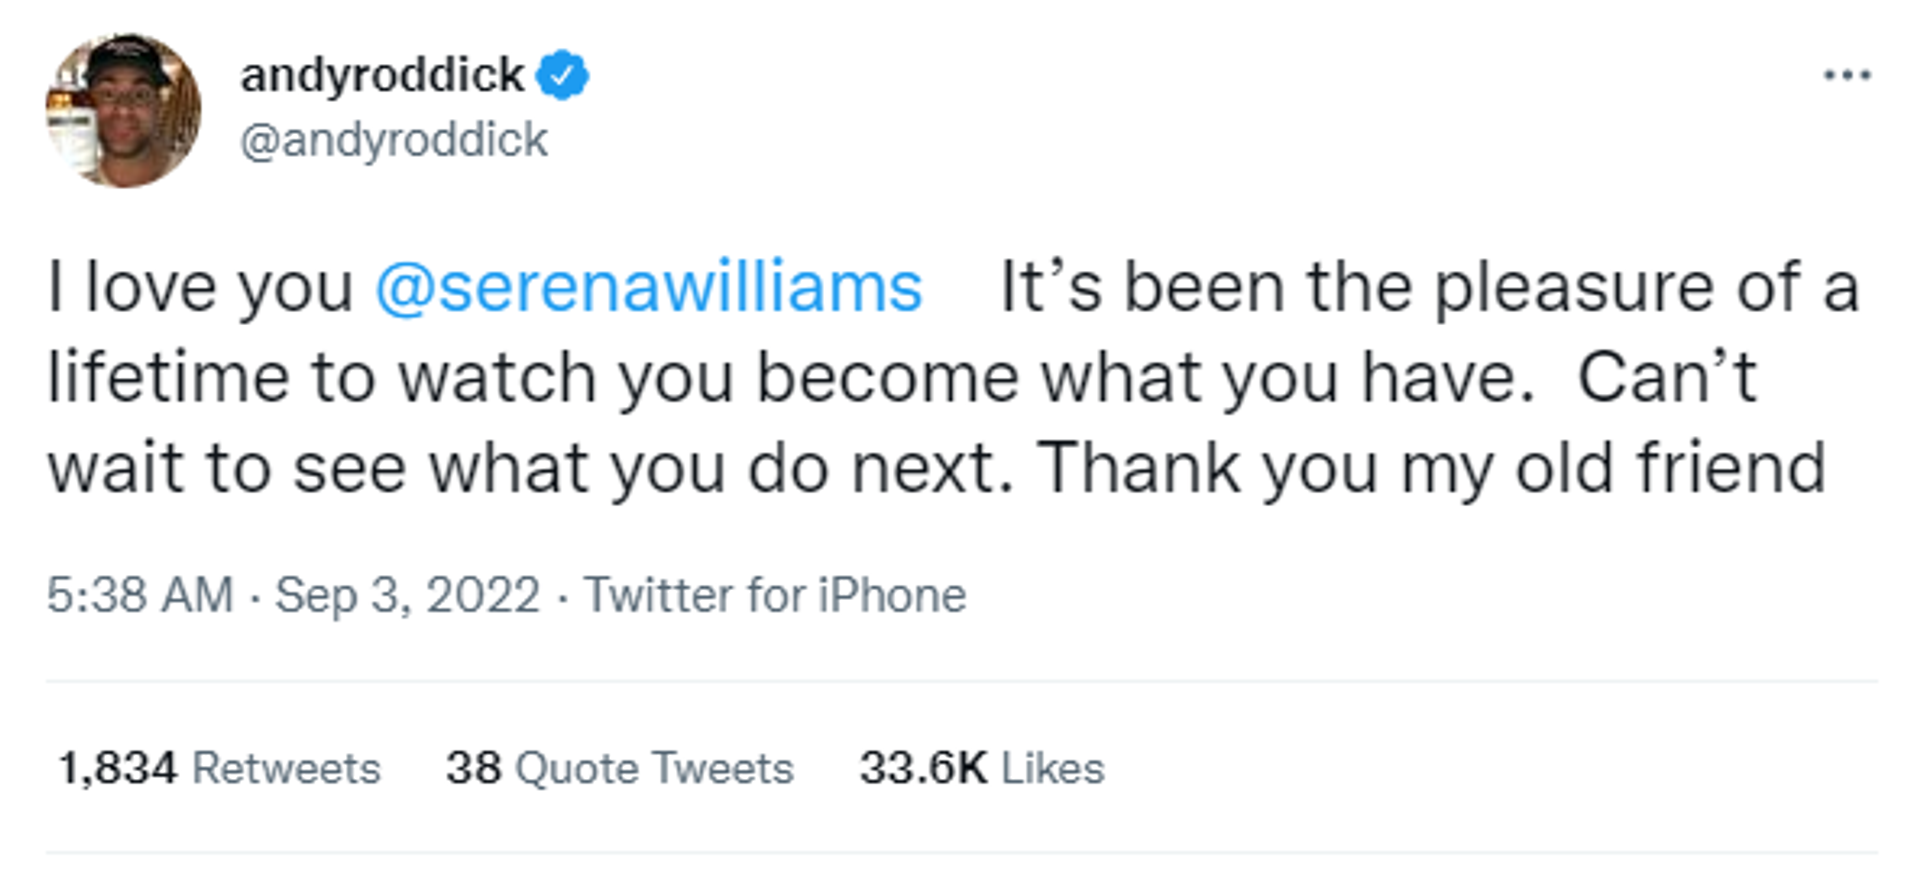 A screenshot of a tweet by tennis player Andy Roddick about the retirement of Serena Williams - Sputnik International, 1920, 03.09.2022